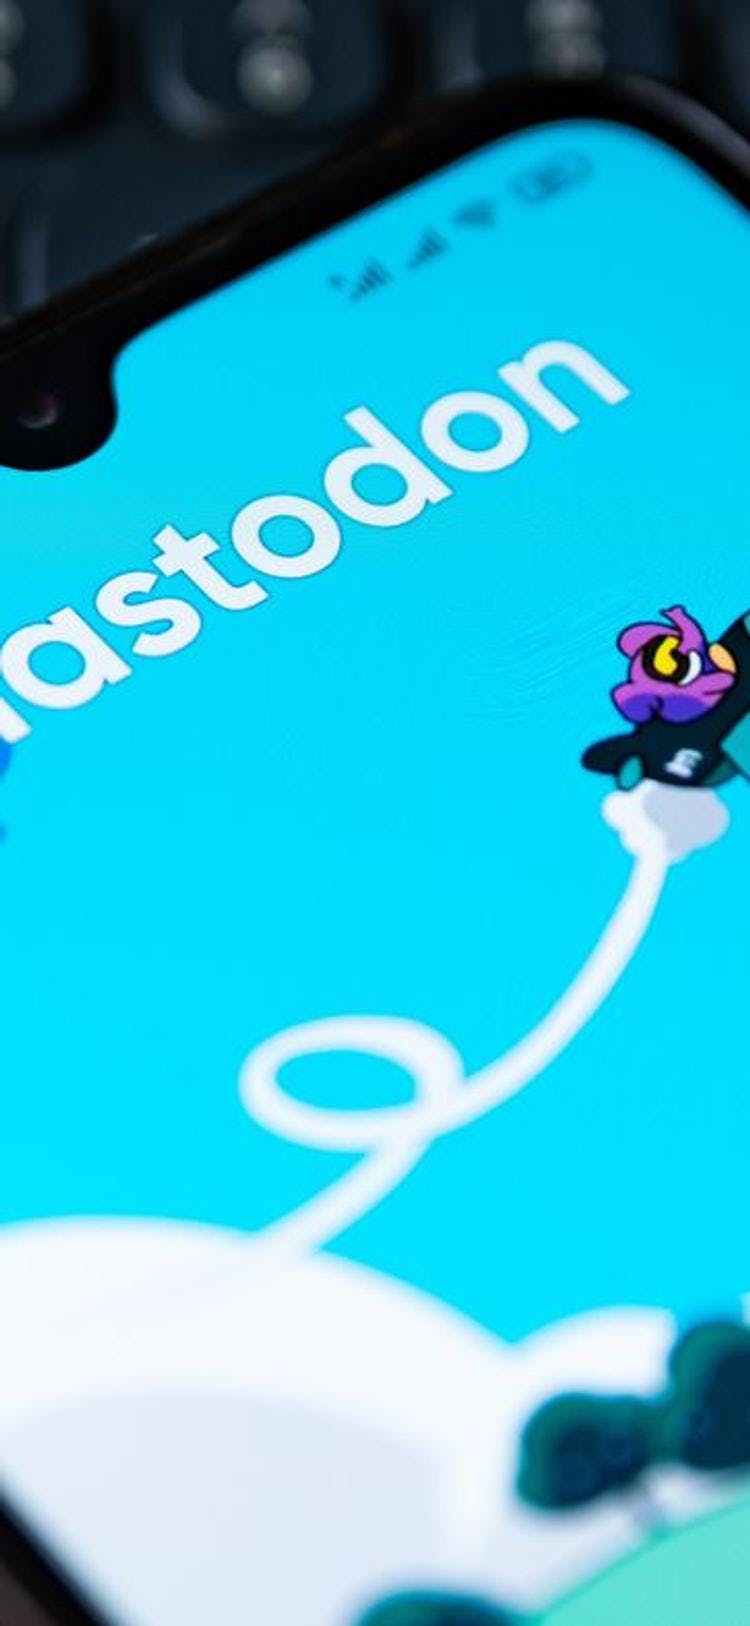 when elon took over twitter late last year, npr said users were ditching twitter for mastodon, a text-based social platform